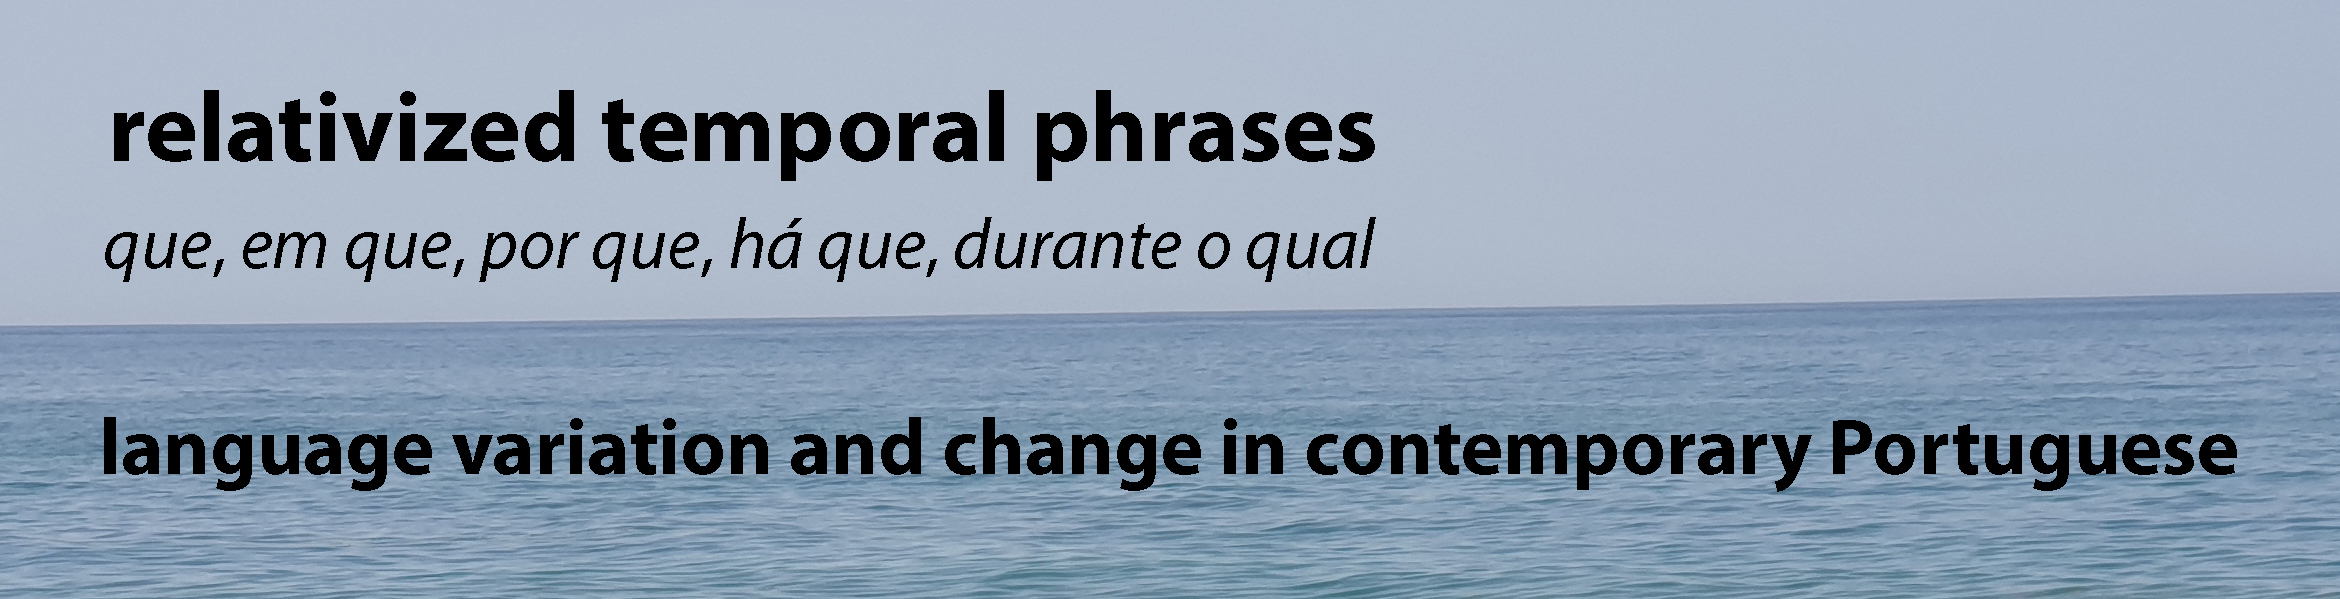 Relativized temporal phrases: Language variation and change in contemporary Portuguese